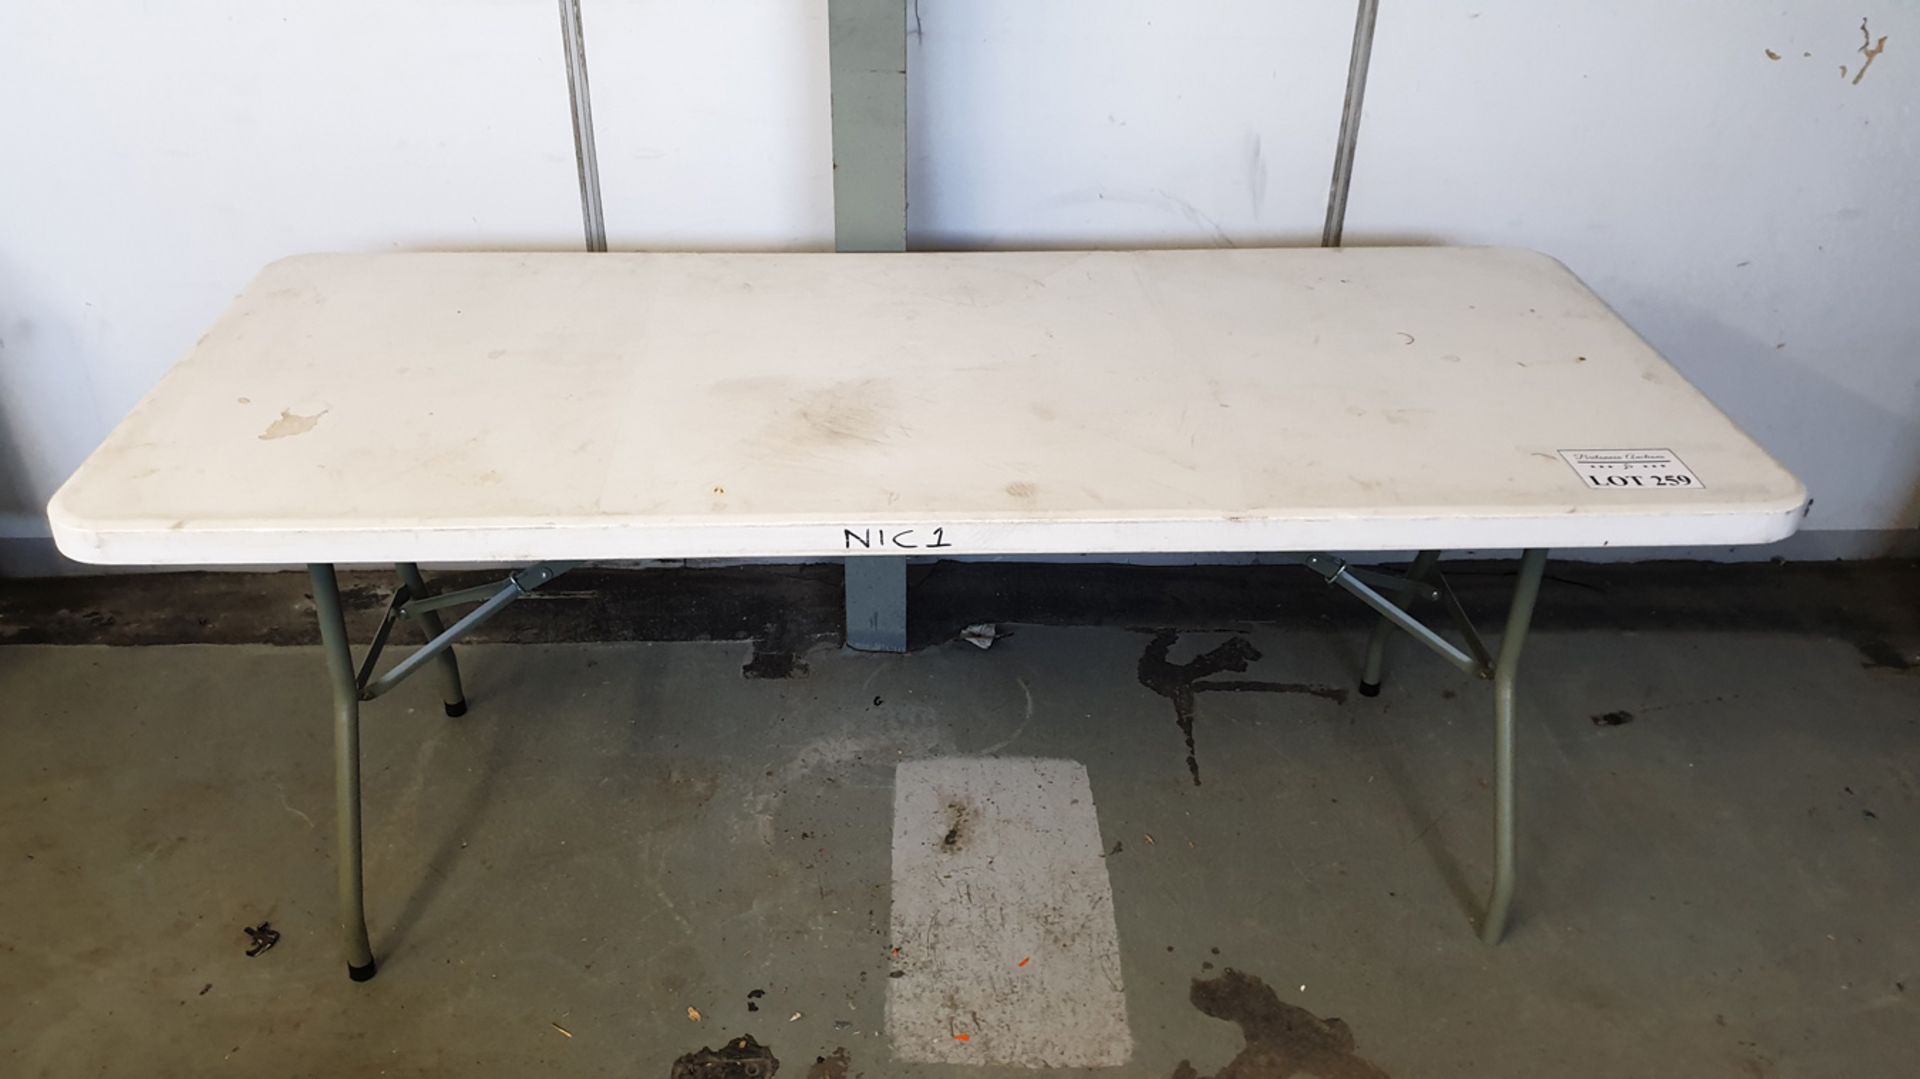 Table with Folding Legs. Approx Size 72" x 30" x 29" High.